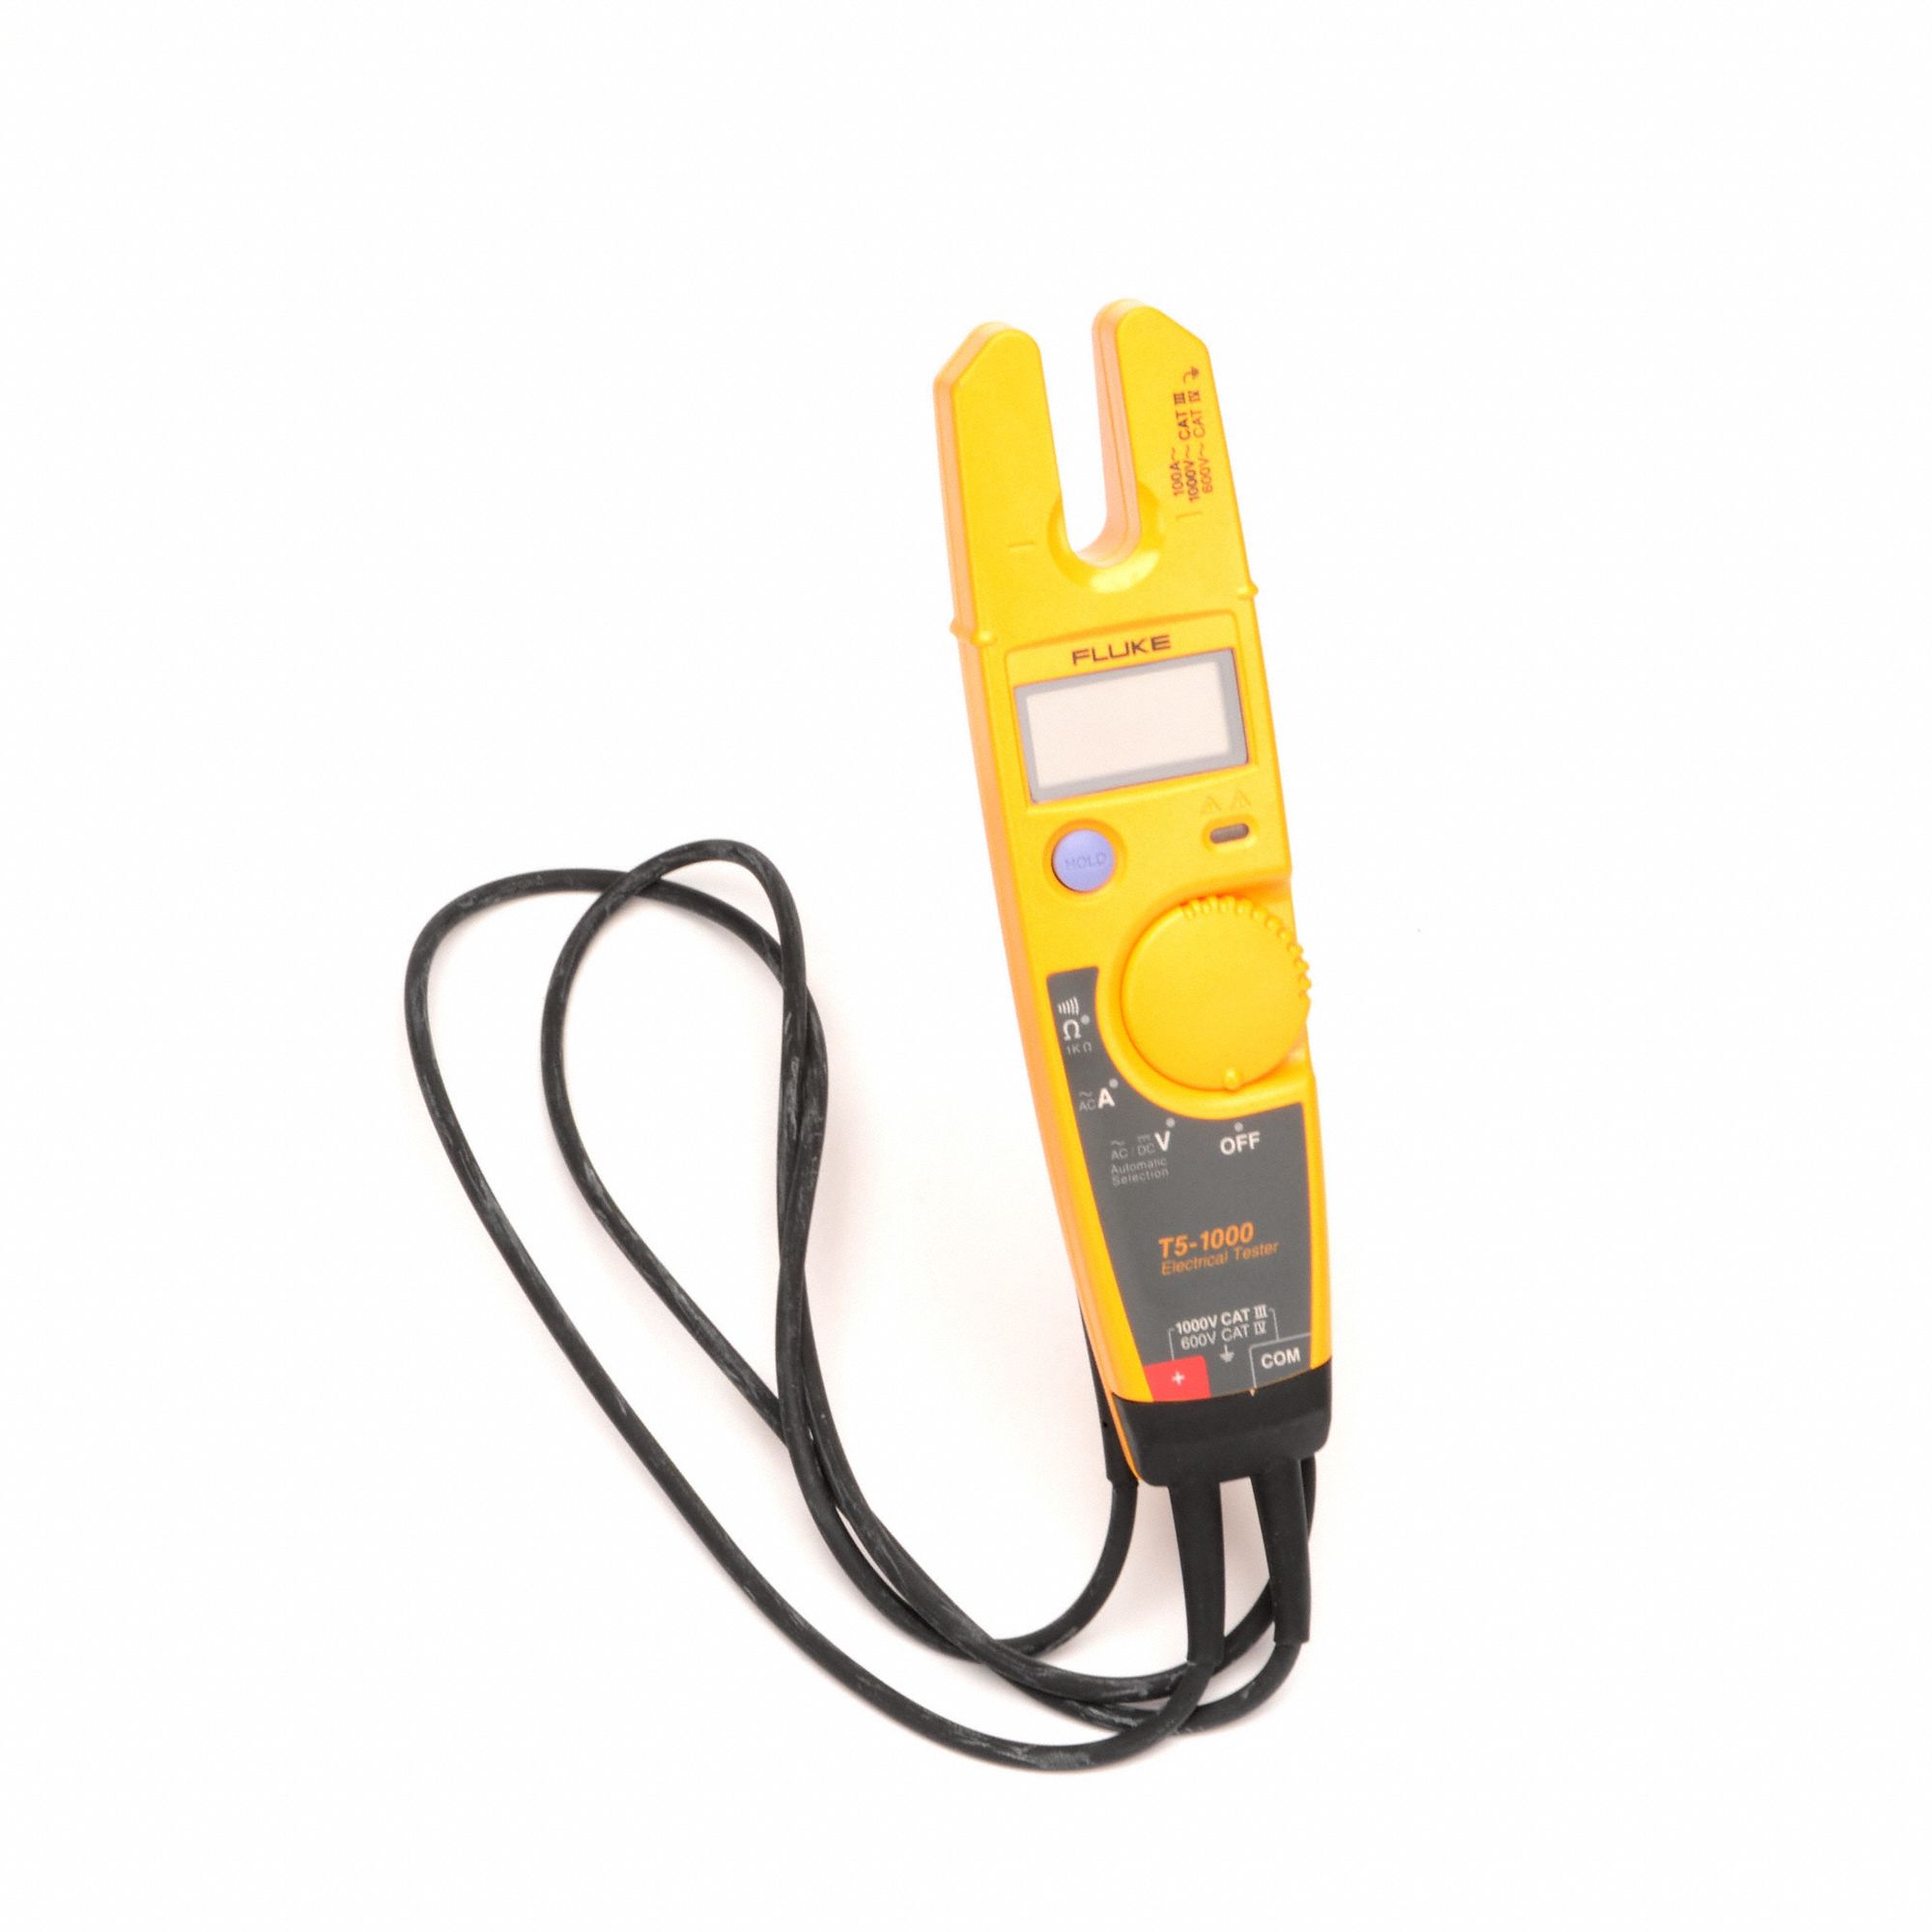 FLUKE T5-1000 1000V 100A Voltage Continuity Current Electrical Tester Meter  Cat - Helia Beer Co